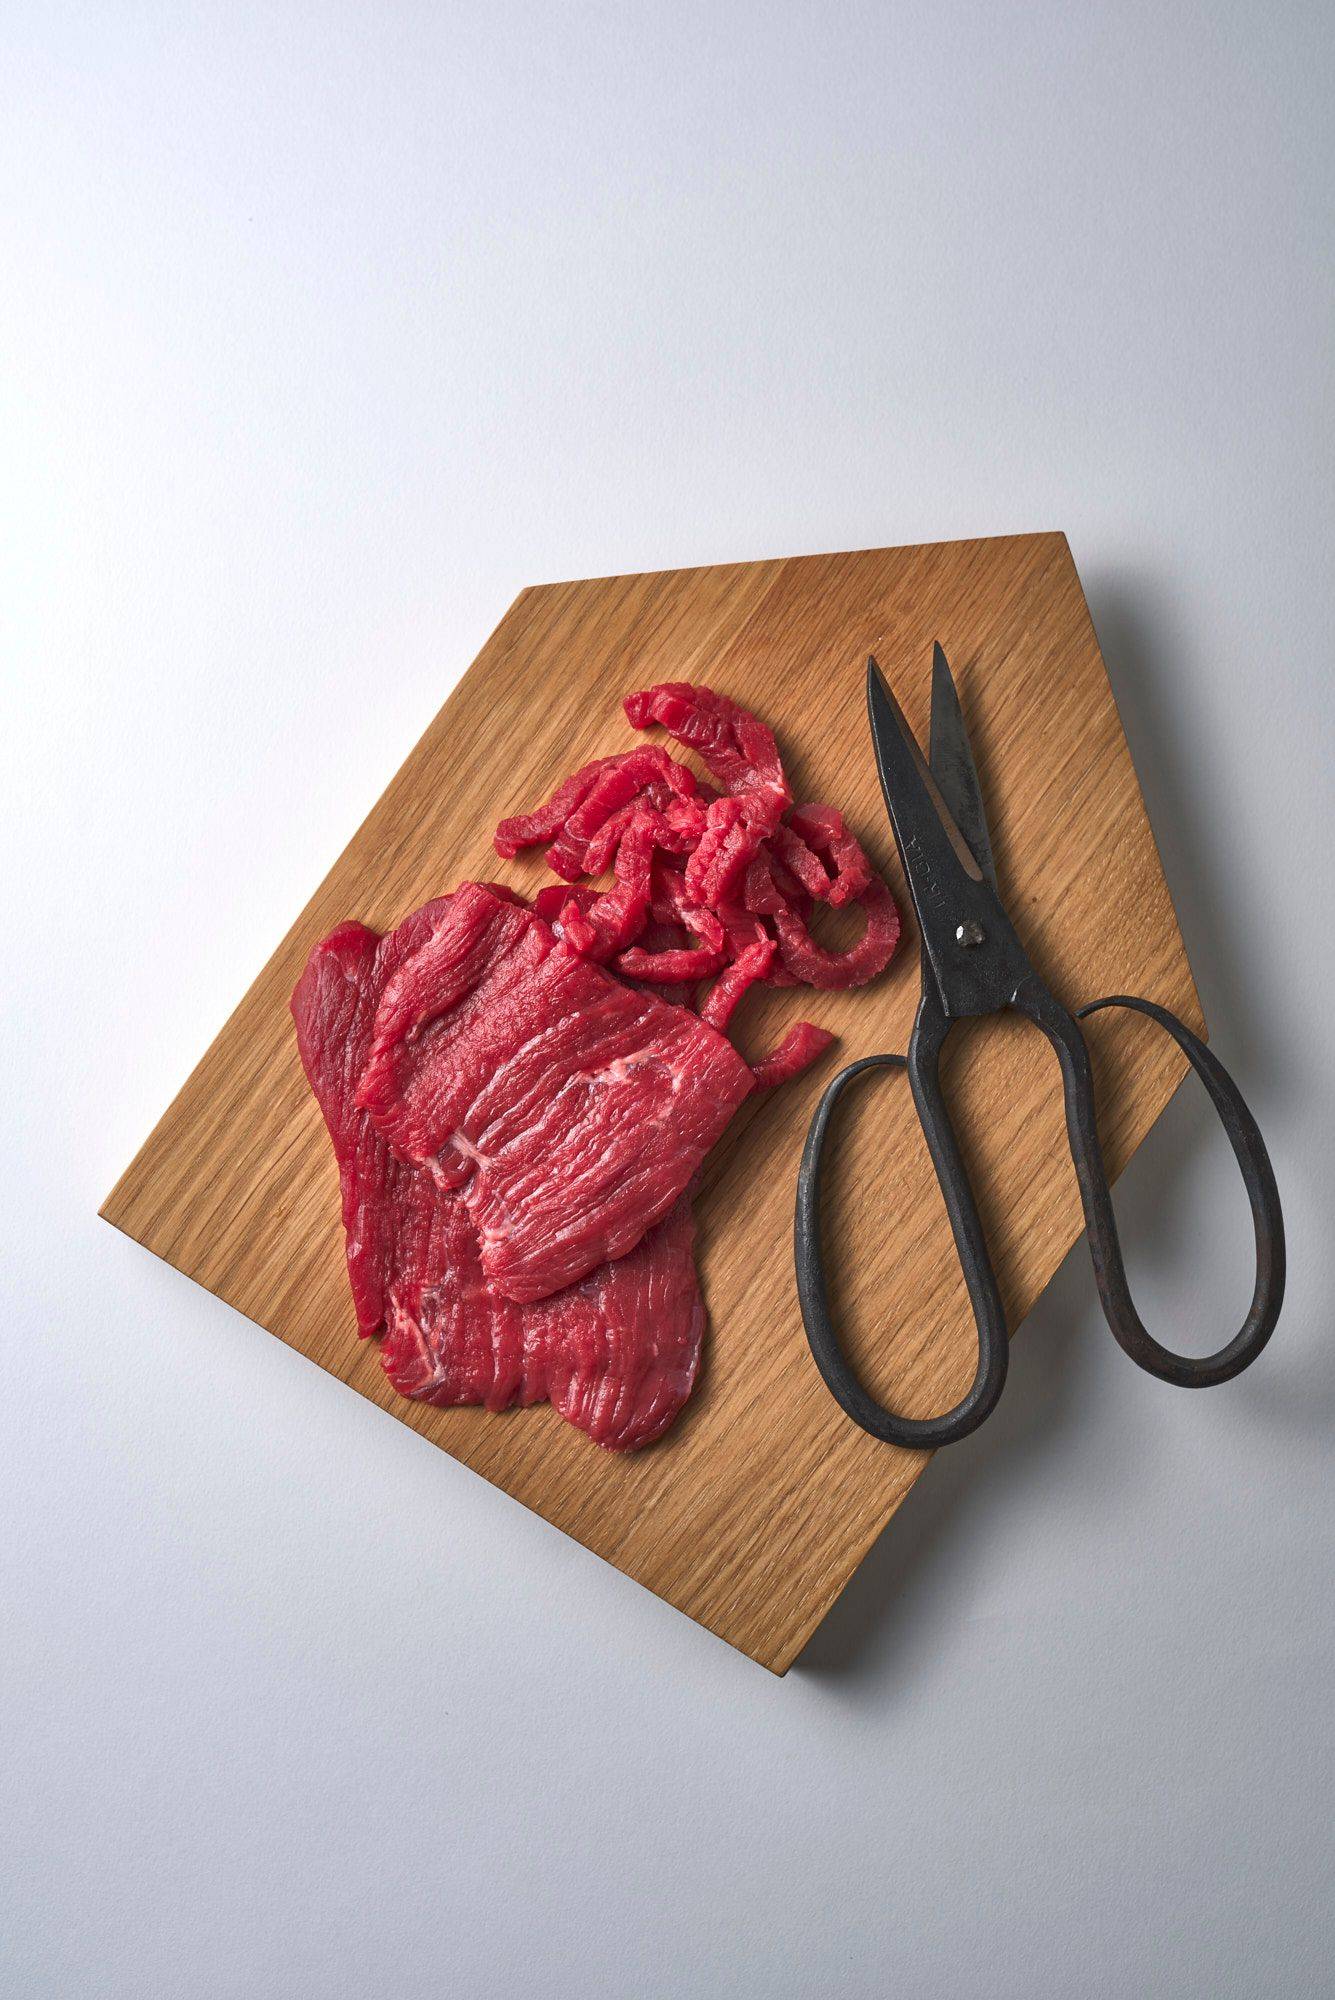 beef on a wooden tray with scissors on white background